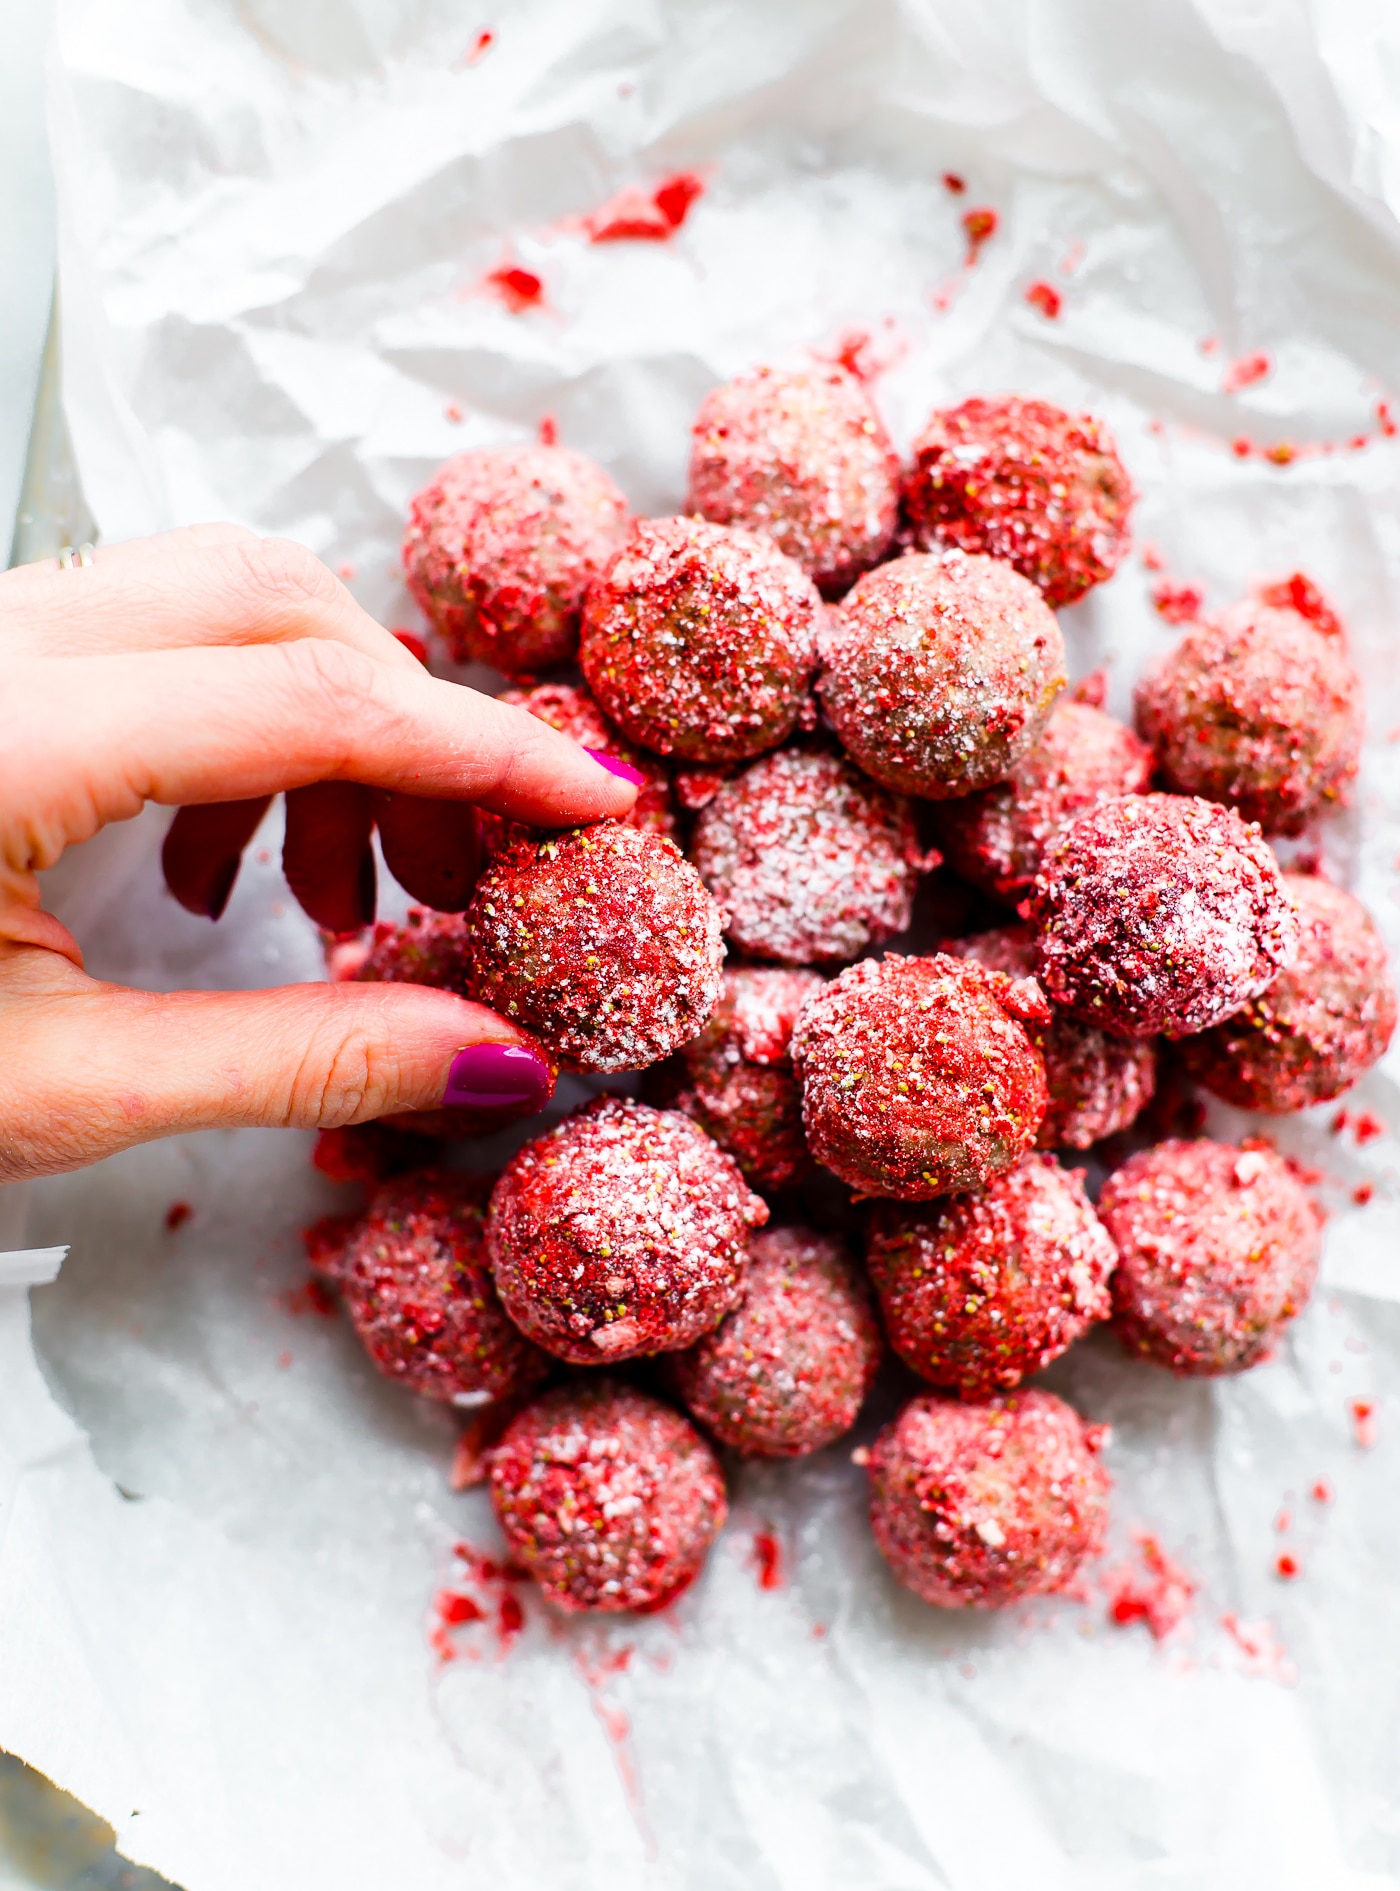 These Vegan No Bake Strawberry Cake Bliss Bites are the bite size healthy dessert. Just dried Strawberries, cashew cream, gluten free granola/flour, and a sweet jam filling! Tart and tasty! A vegan cake bite that requires no baking, just blissfully nourishing. Paleo friendly.